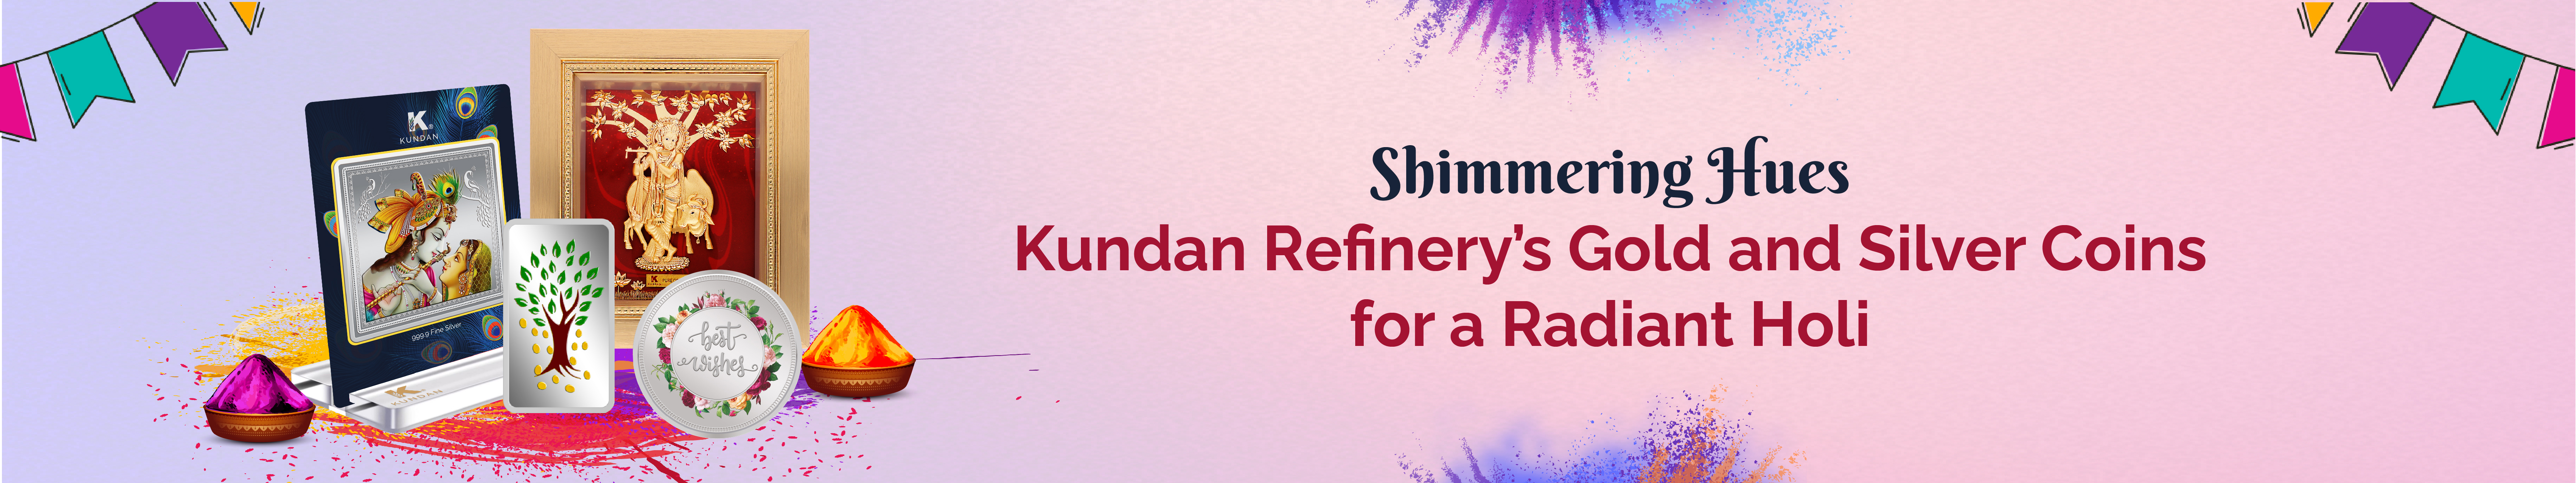 Shimmering Hues: Kundan Refinery’s Gold and Silver Coins for a Radiant Holi